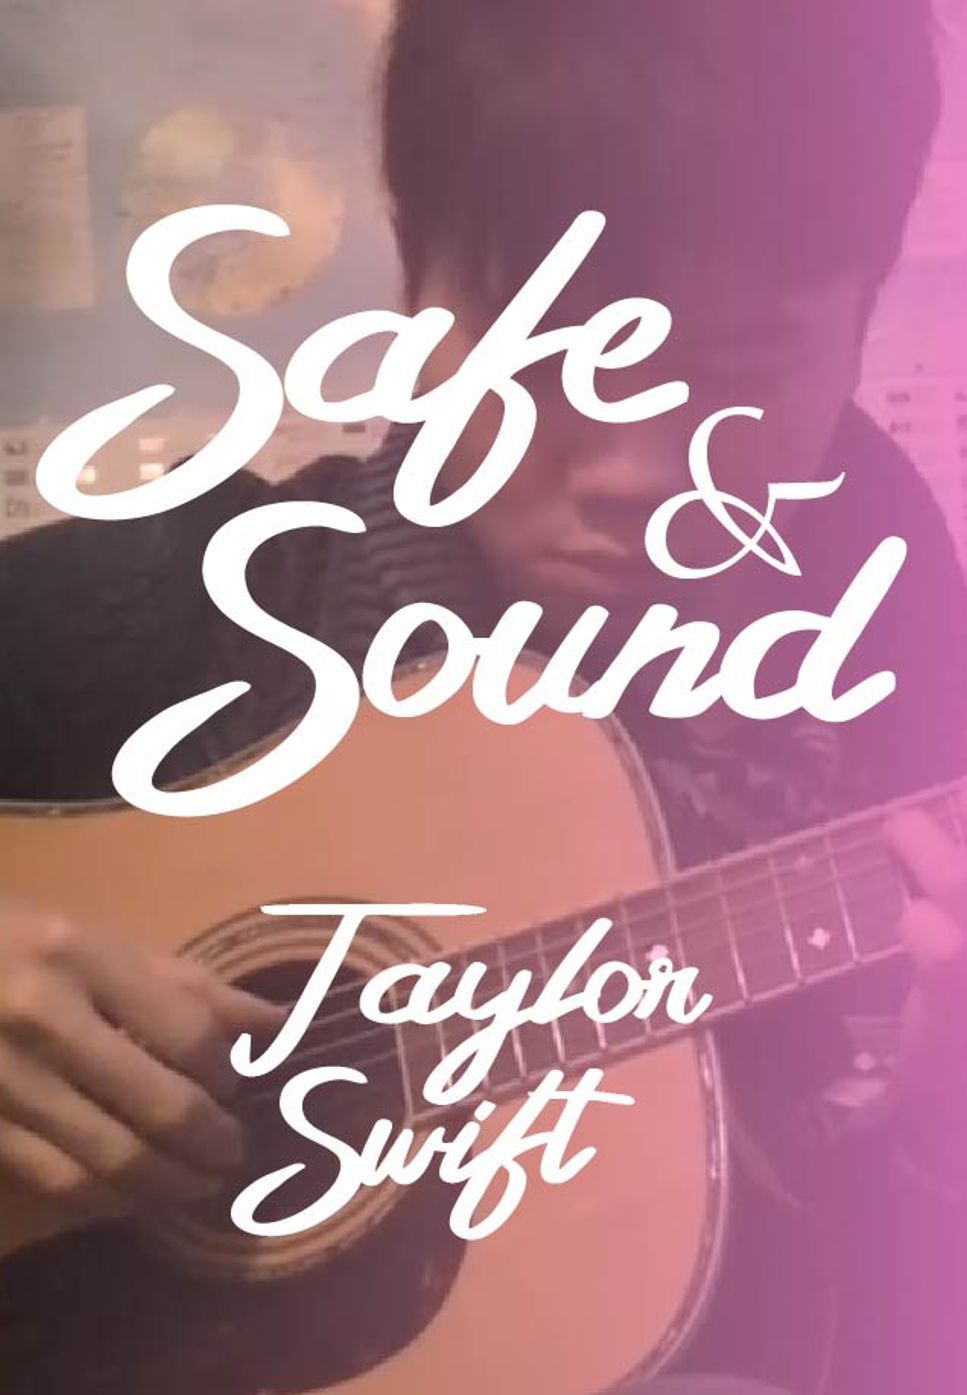 Taylor Swift - Safe and Sound (Fingerstyle) by howming